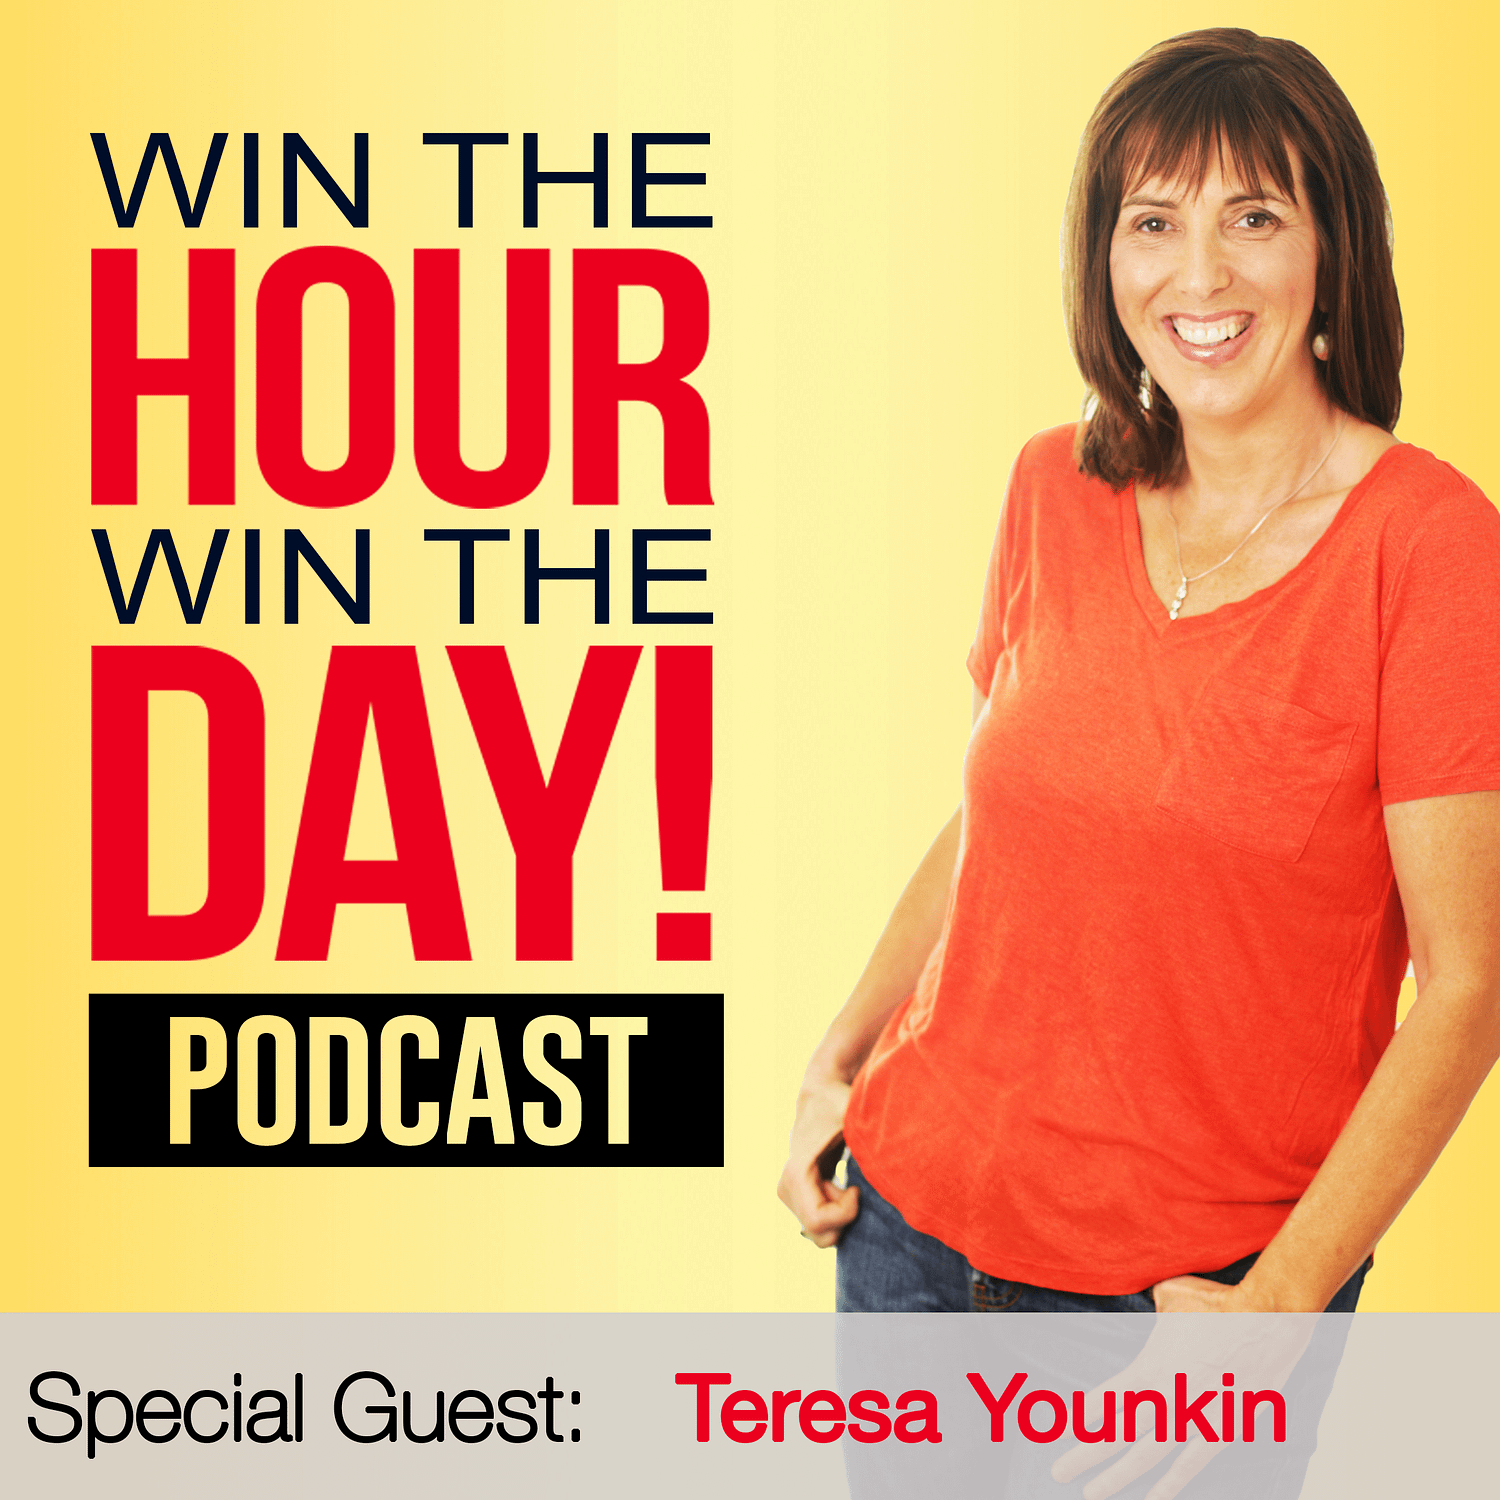 Leadership 101 And Grow Your Business Today! with Teresa Younkin